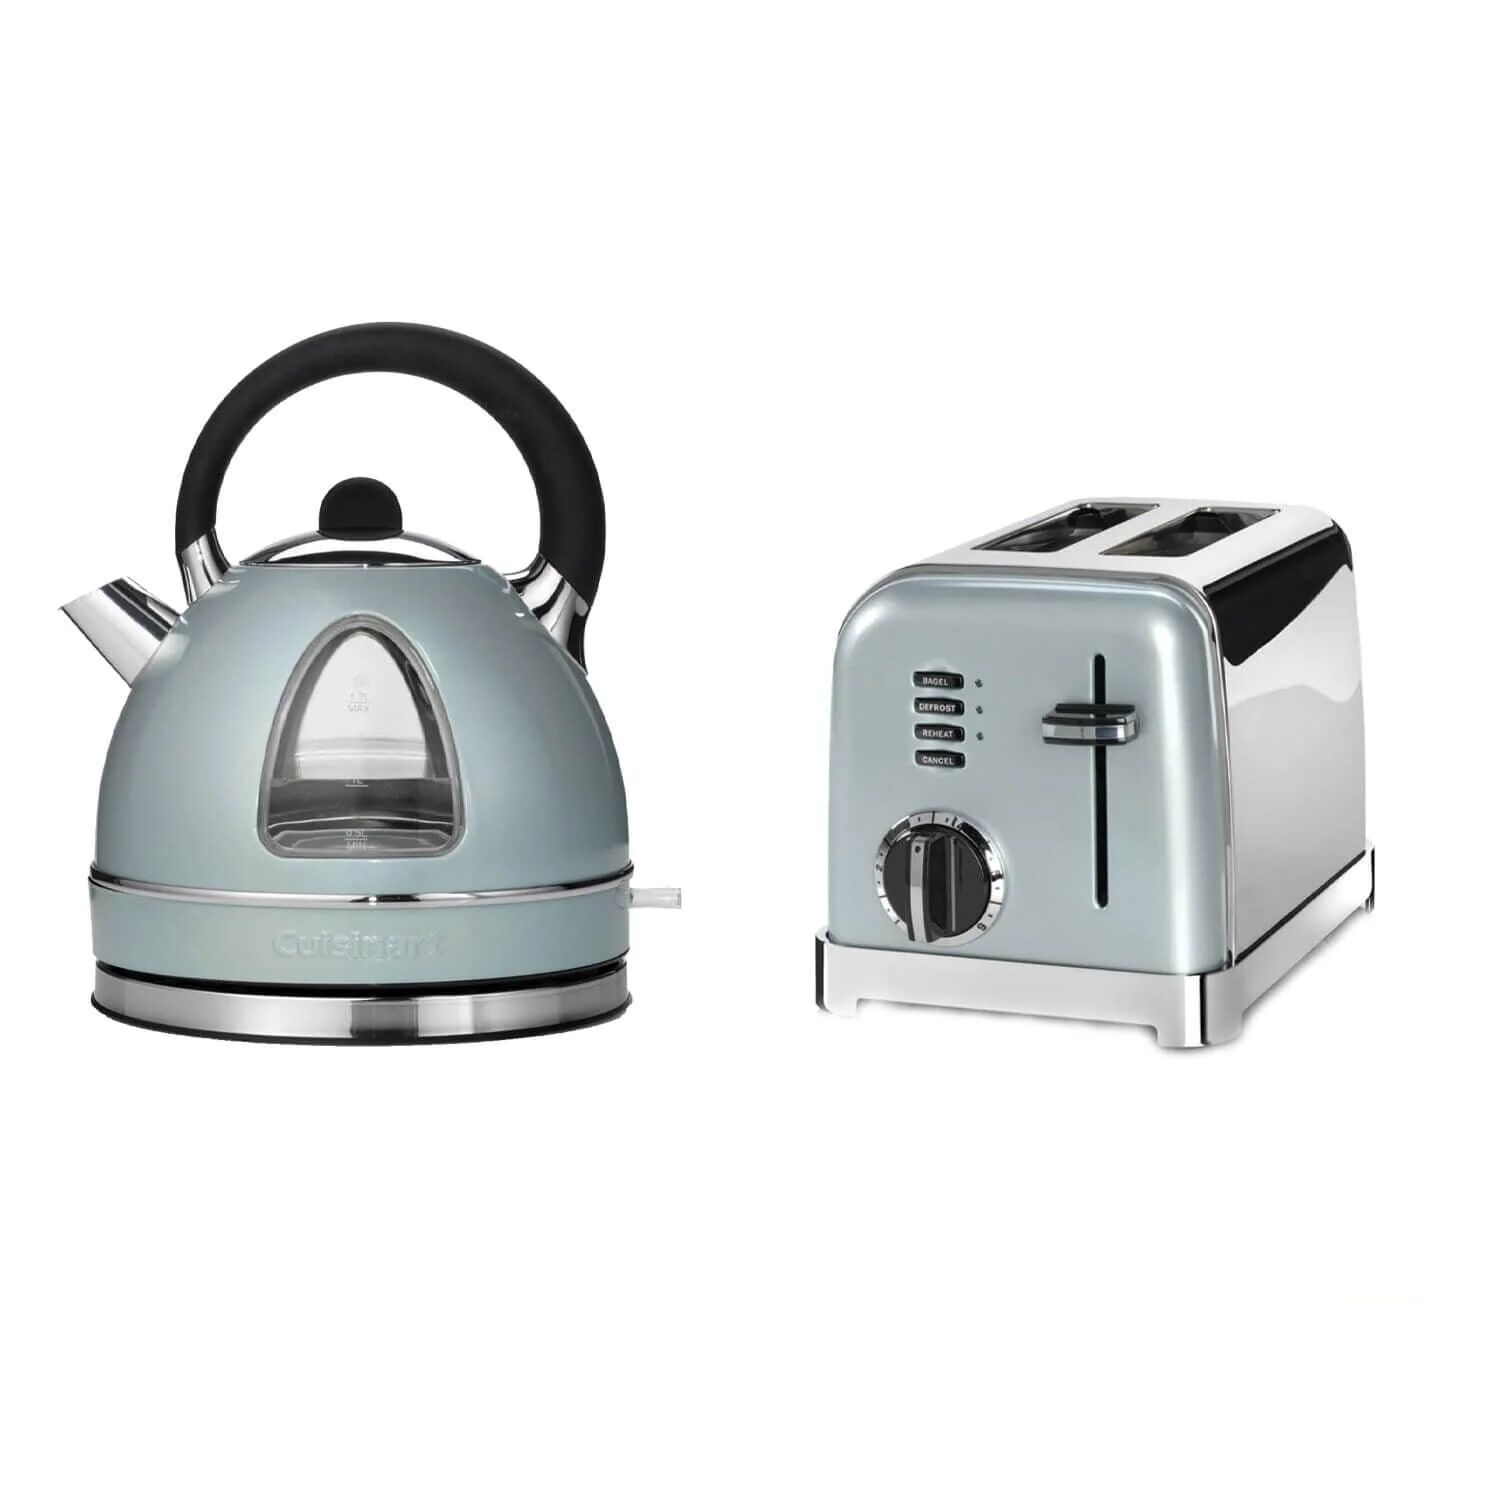 Cuisinart Style Collection Traditional Dome Kettle & 2 Slice Toaster Set - Pistachio